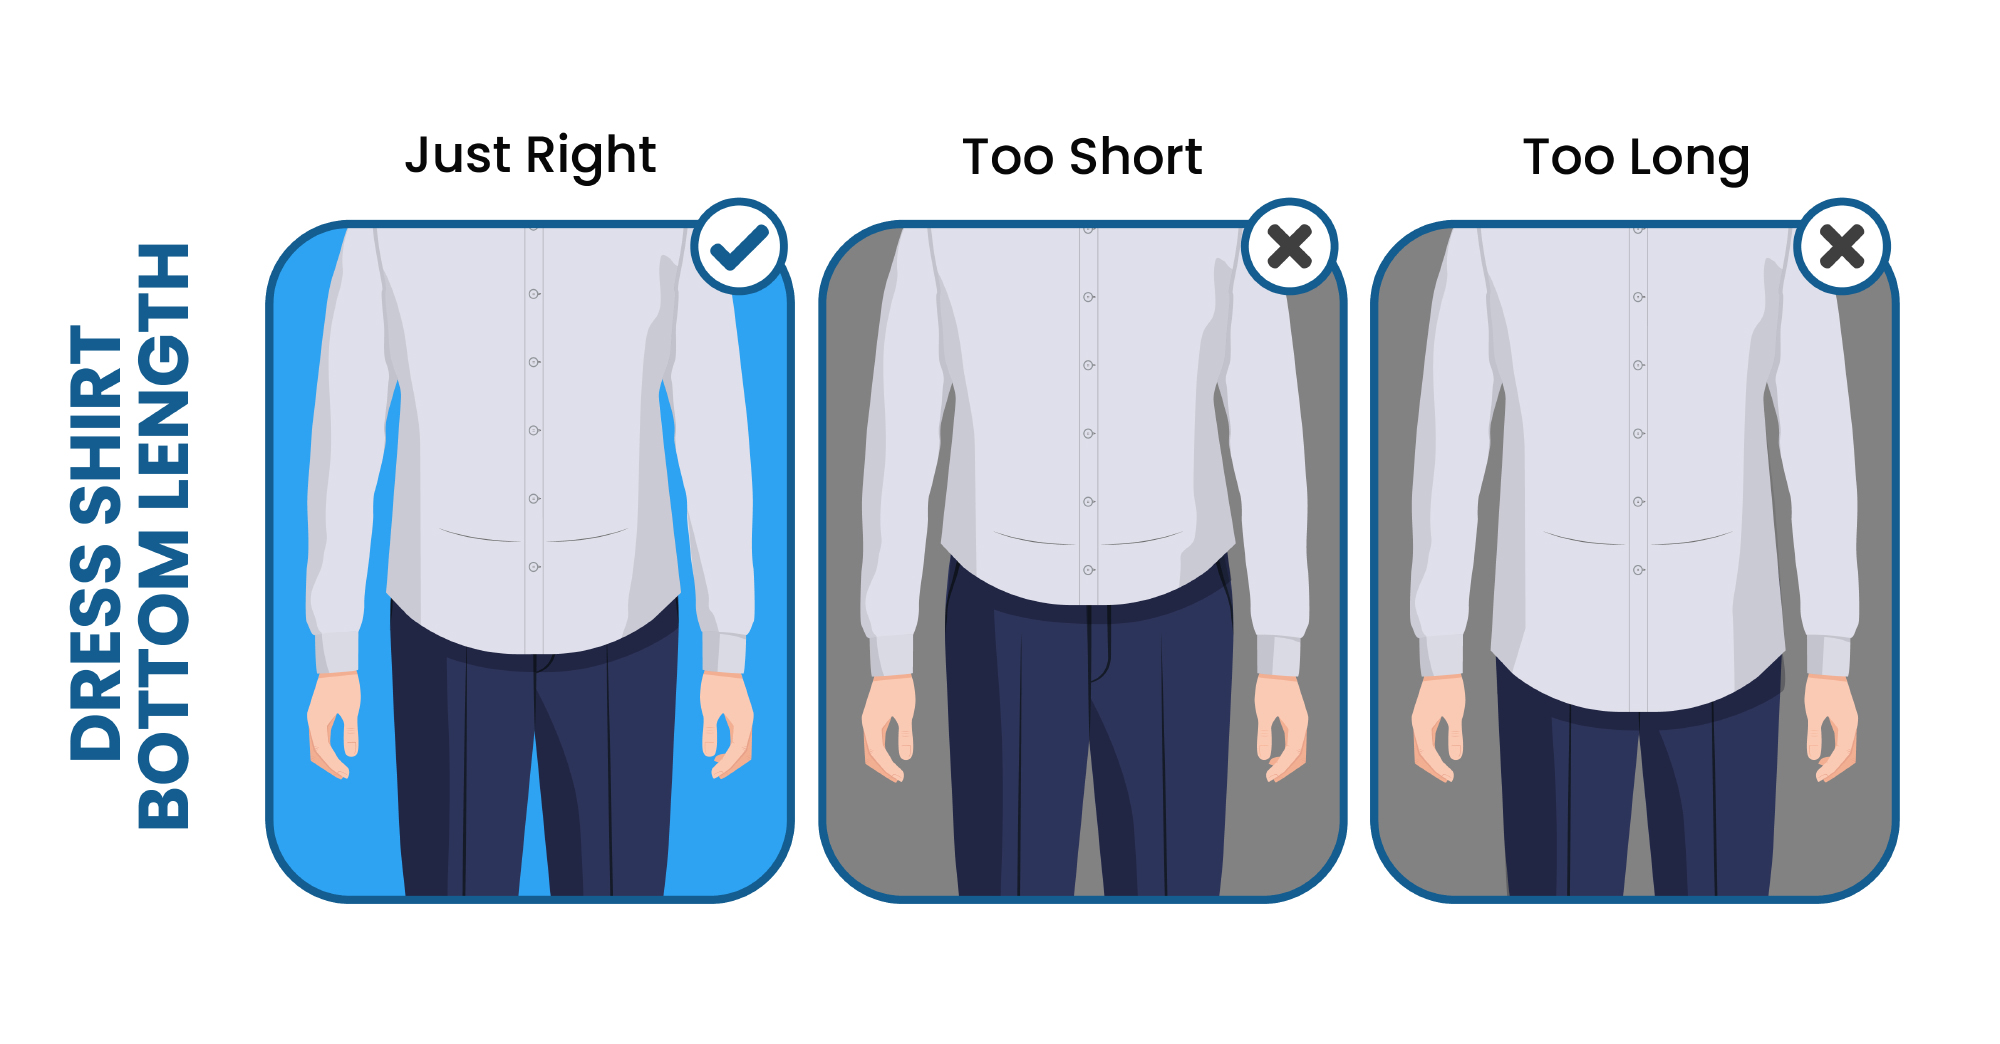 Alternative bottleneck In need of How Should a Men's Dress Shirt Fit Properly - Suits Expert